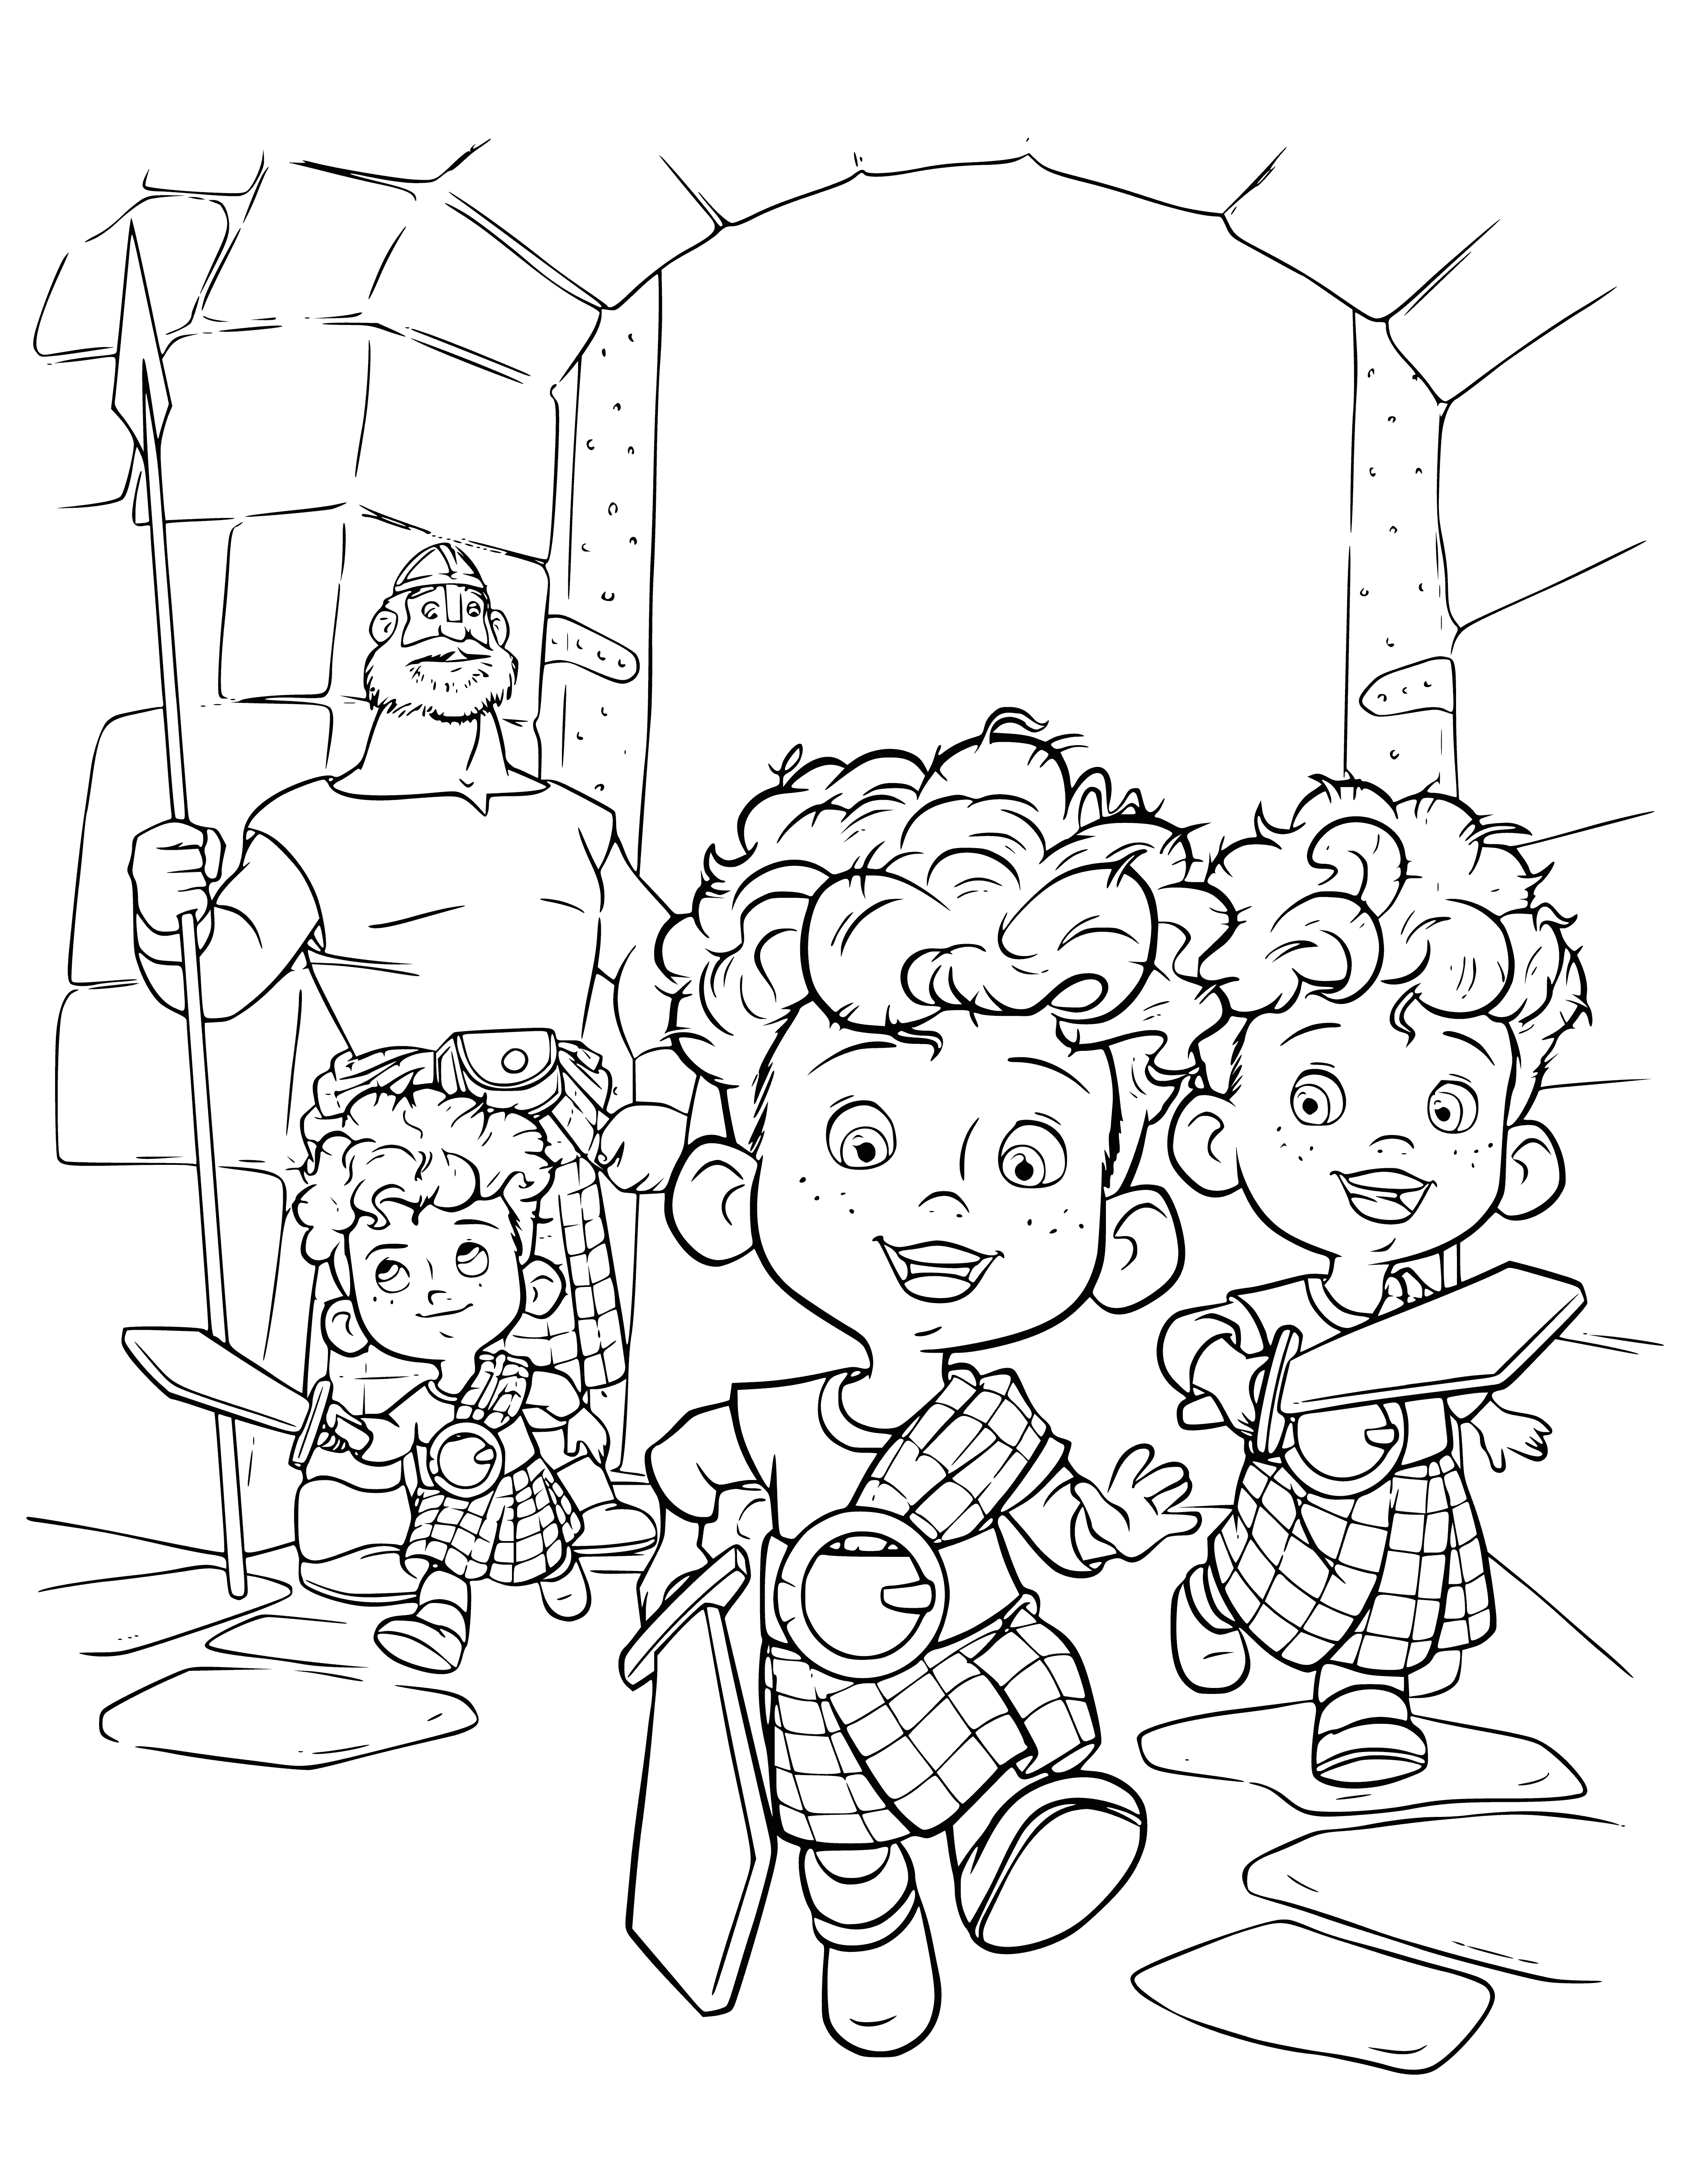 coloring page: Two boys play with toy cars, laughing and having fun. #Kids #ToyCars #Play